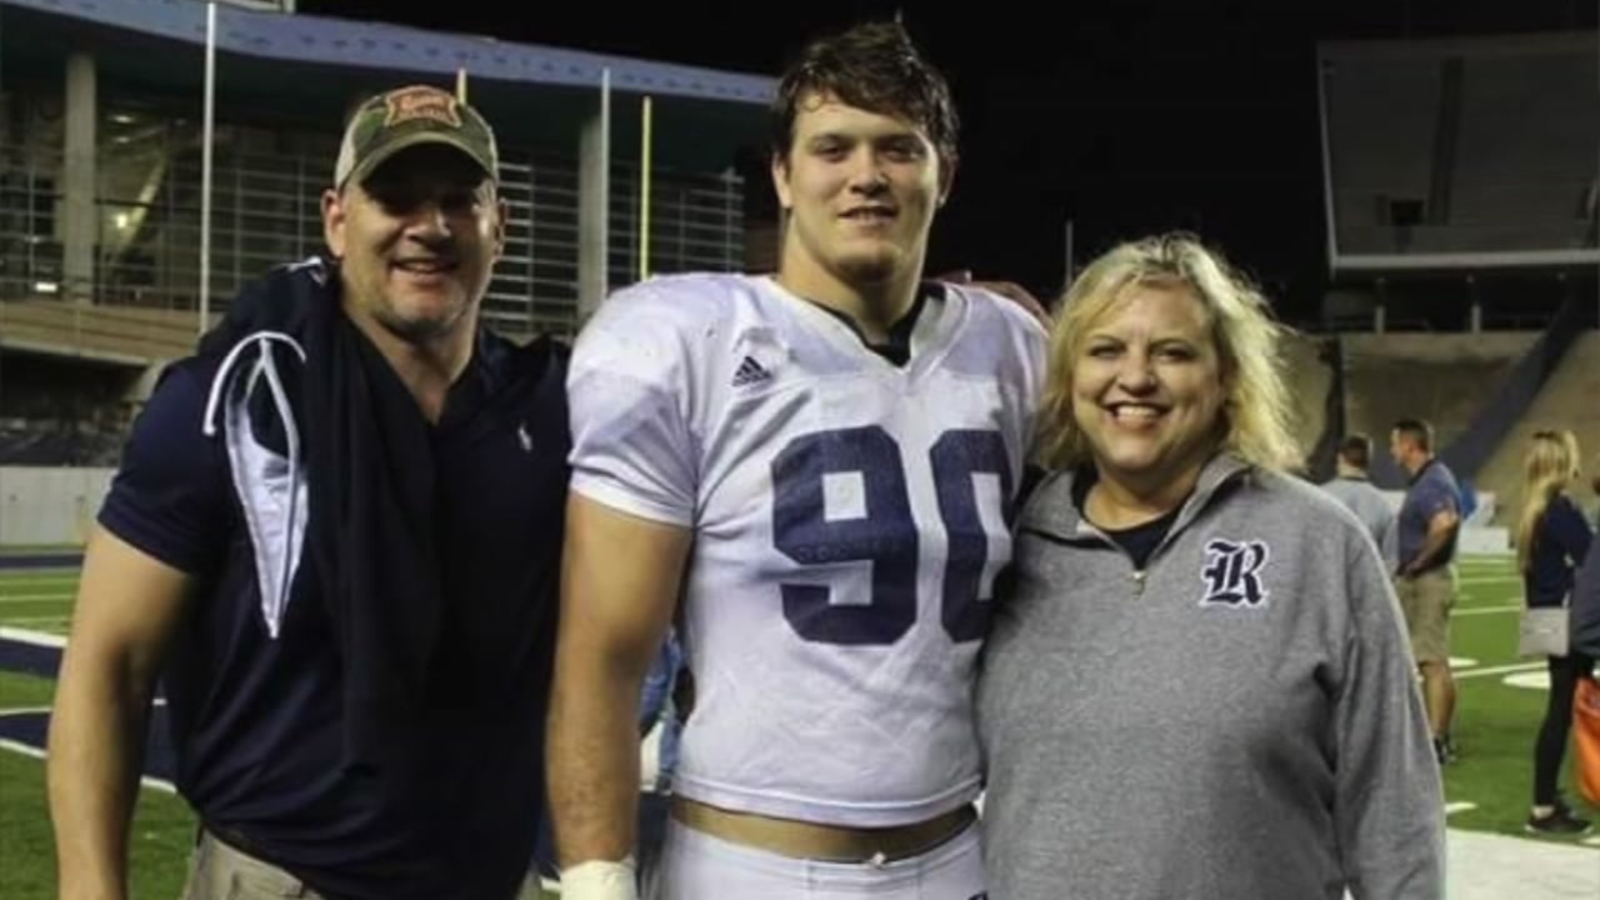  ONE LITTLE PILL: Parents sound alarm after Rice football star's opioid death 